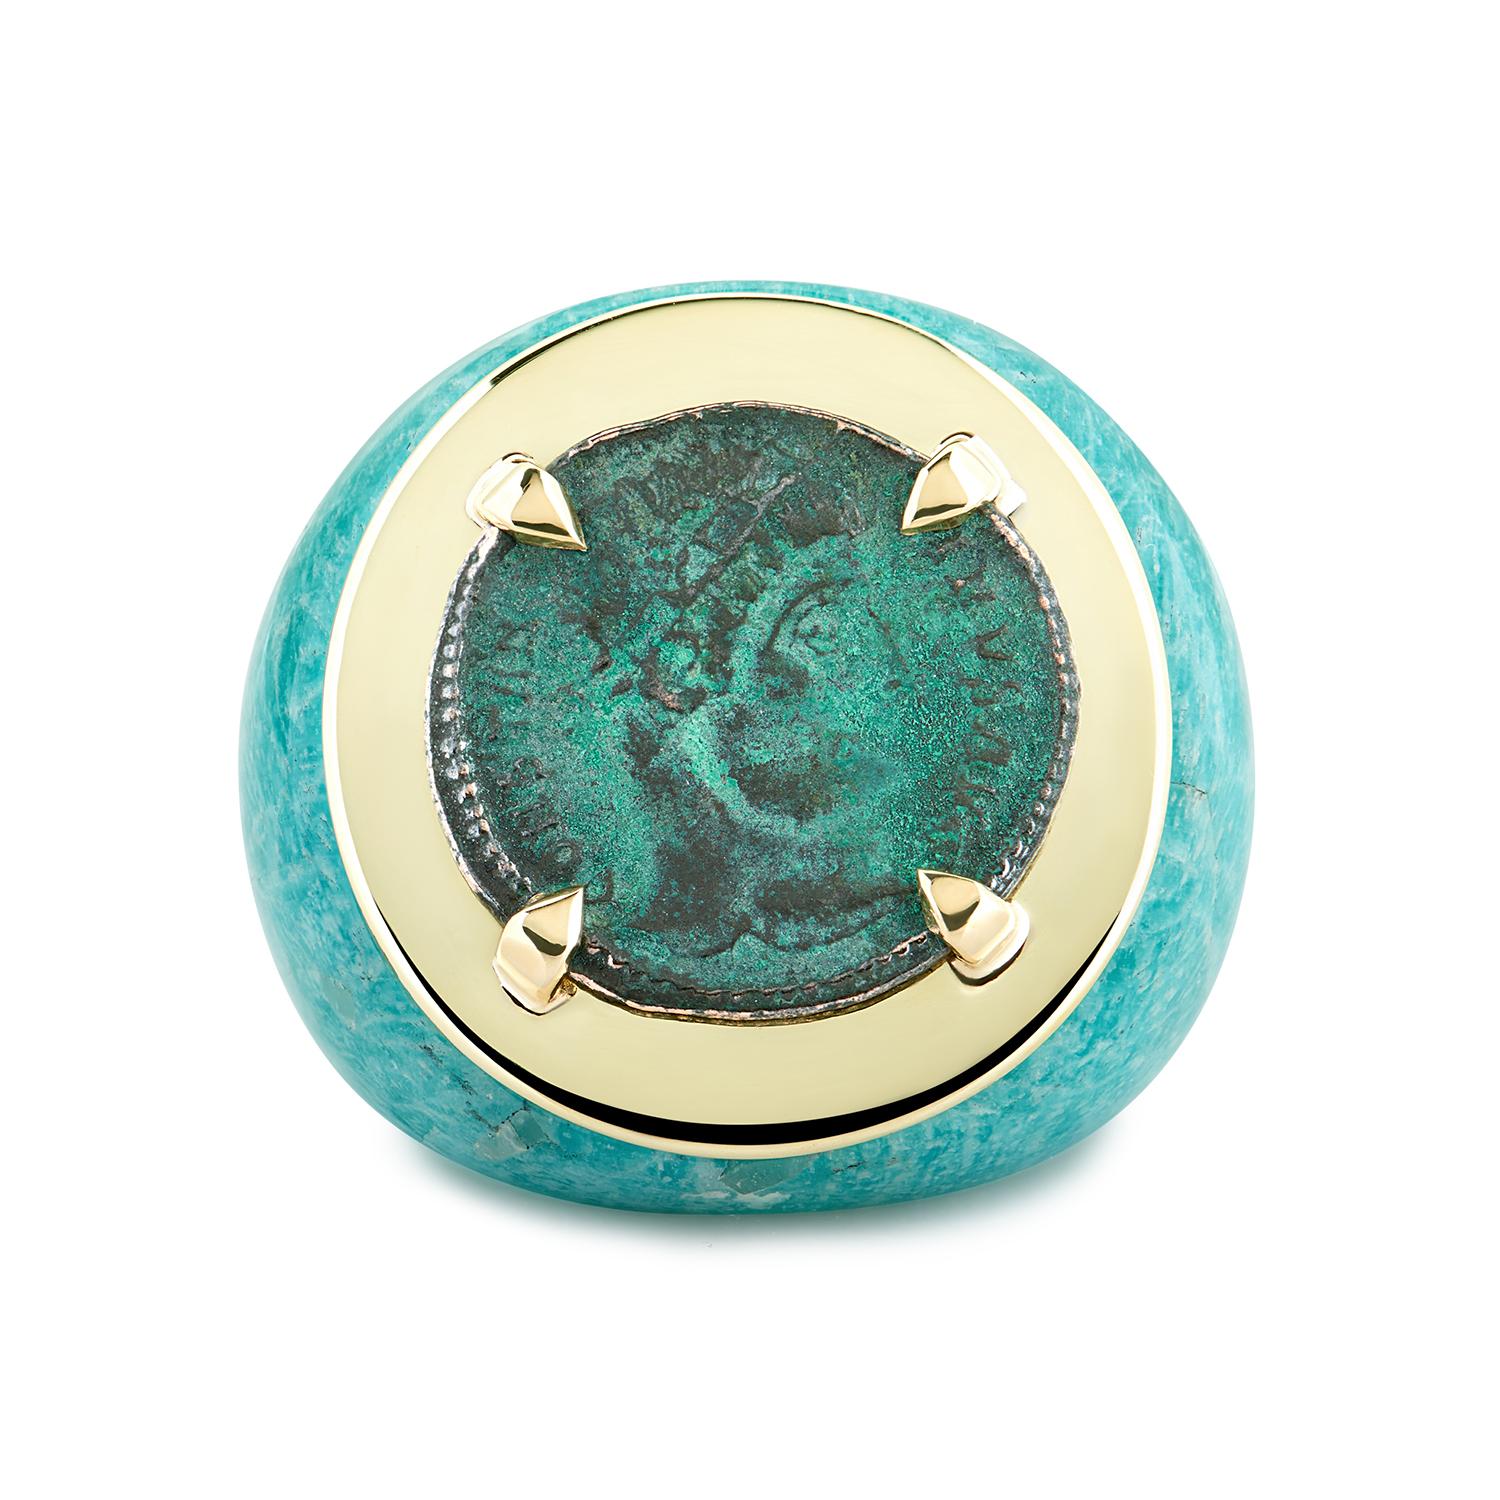 This DUBINI coin ring from the 'Empires' collection features a one-of-a-kind authentic Roman Imperial bronze coin set in 18K yellow gold and amazonite base ring.

* Due to the unique process of hand carving coins in ancient times, there may be a few